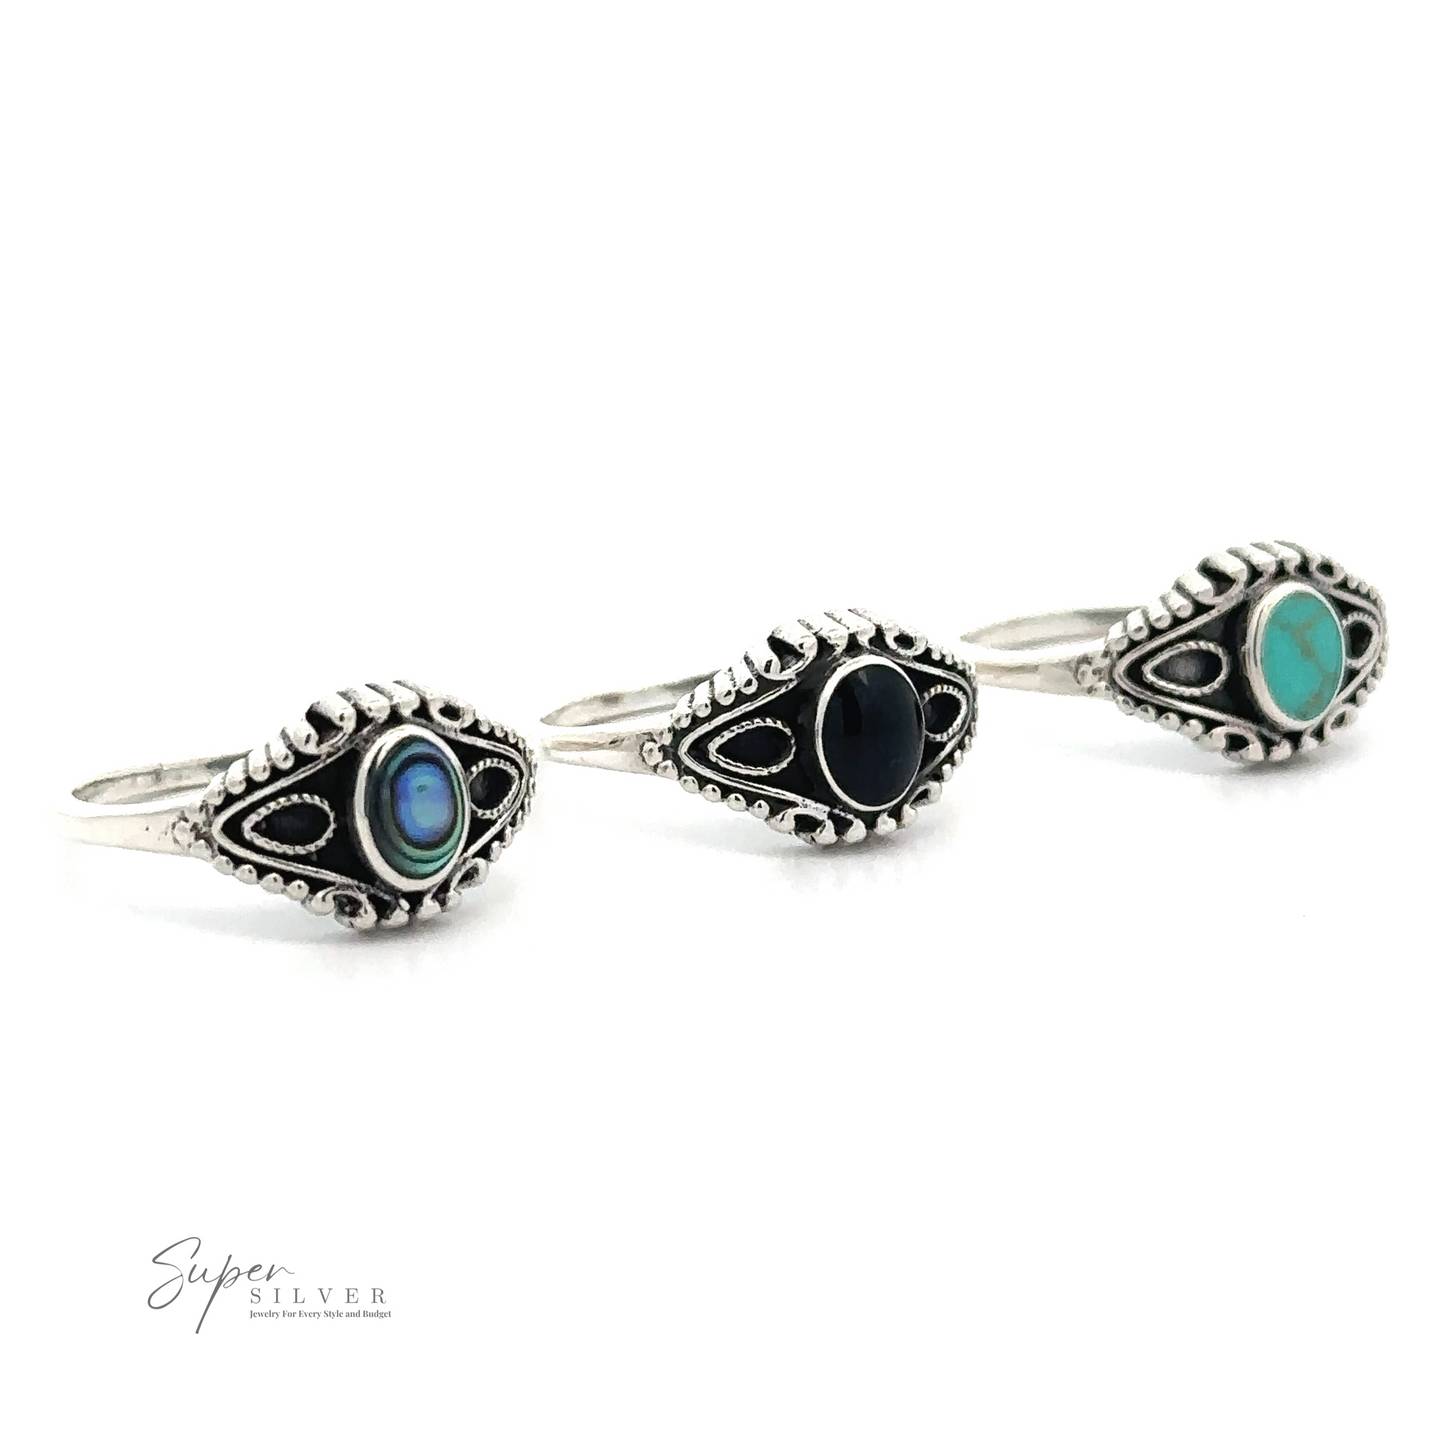 Three silver rings with gemstone inlays (blue, black, and turquoise) are lined up in a row on a white background. The Vintage Style Ring With Inlaid Oval Stone showcases a vintage-style oval ring design. The logo "Super Silver" is in the lower left corner.